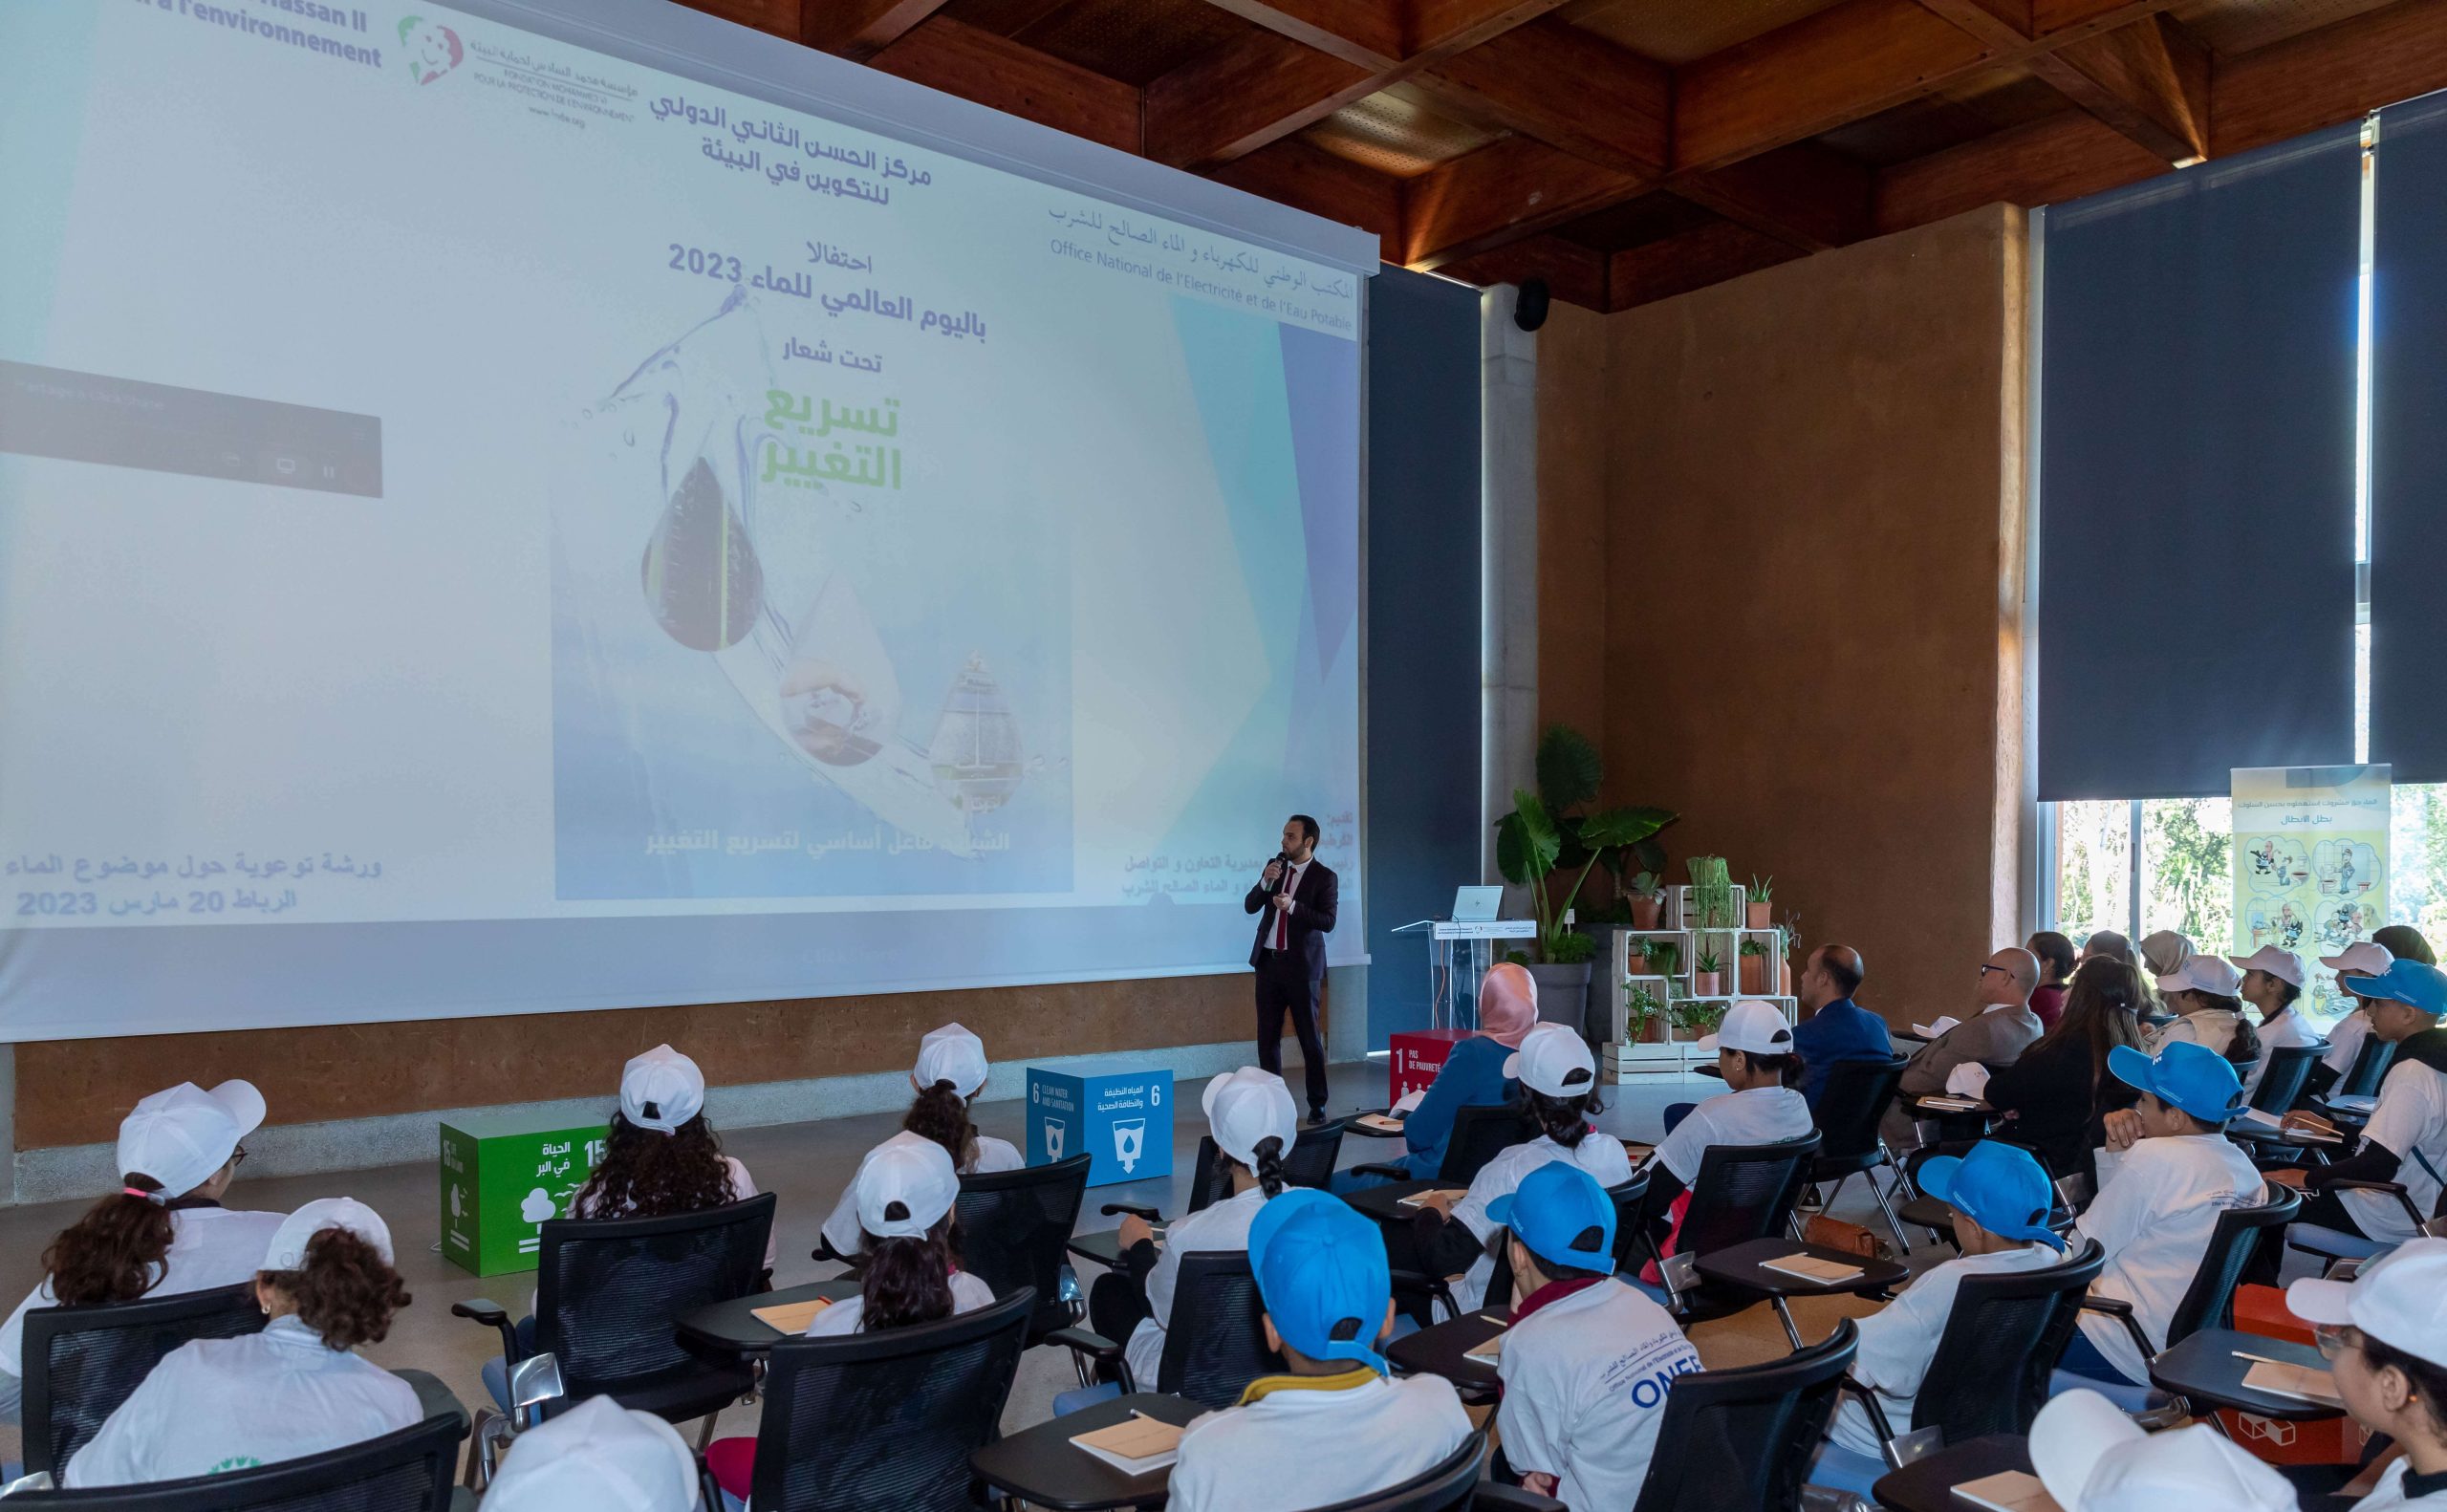 Celebration of the International Water Day : Awareness workshop “Learn to save and preserve water”